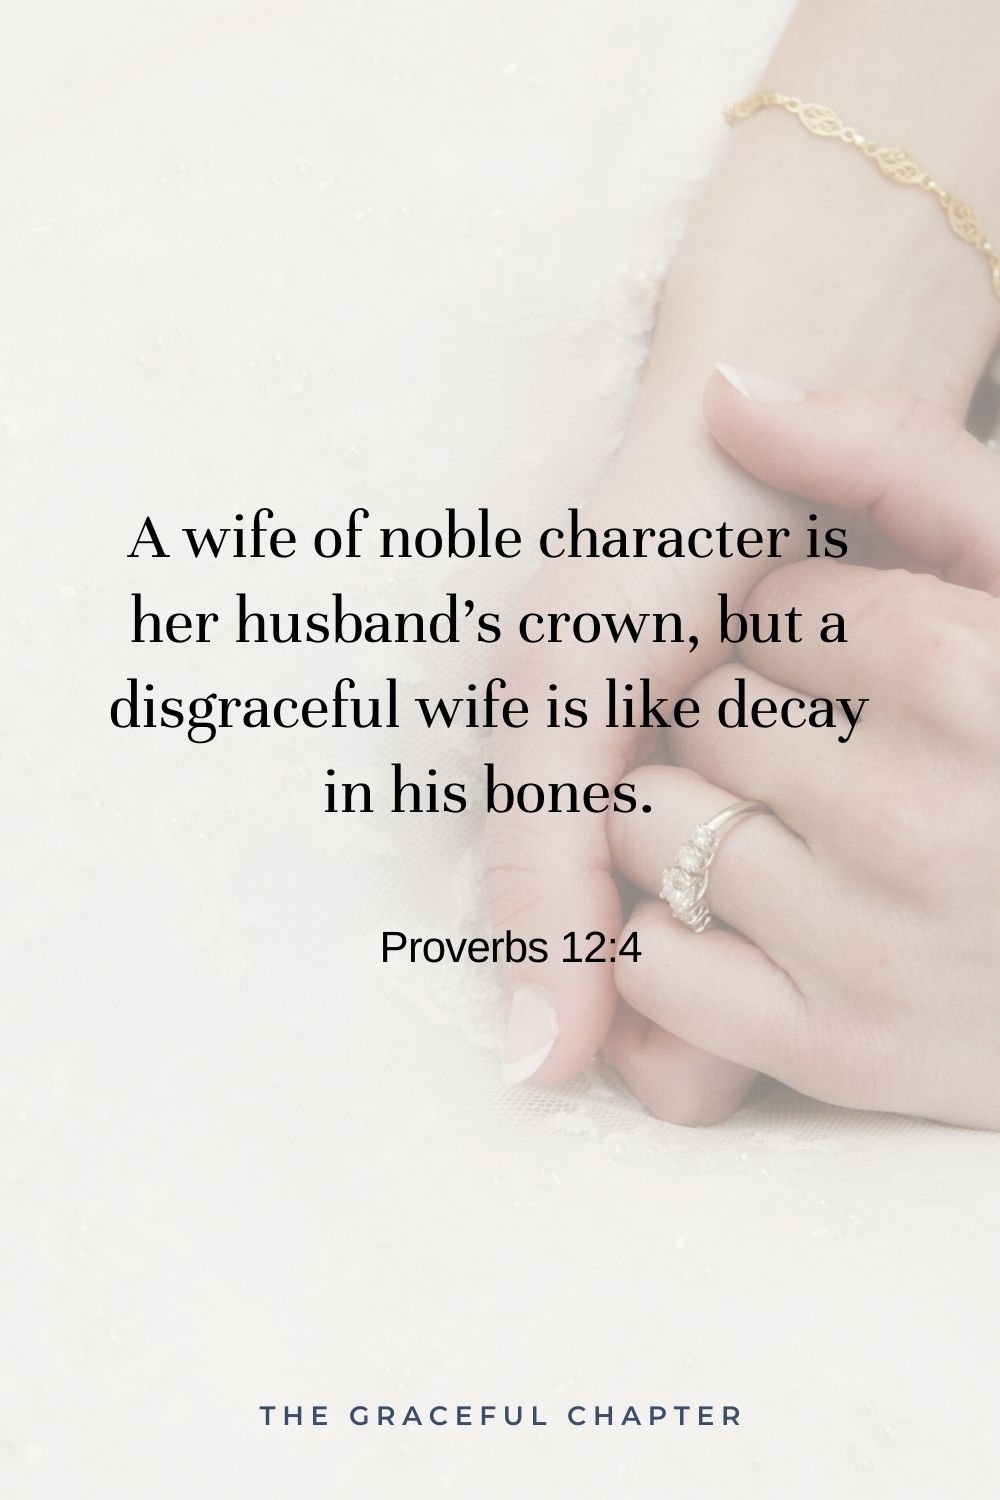 A wife of noble character is her husband’s crown, but a disgraceful wife is like decay in his bones. Proverbs 12:4